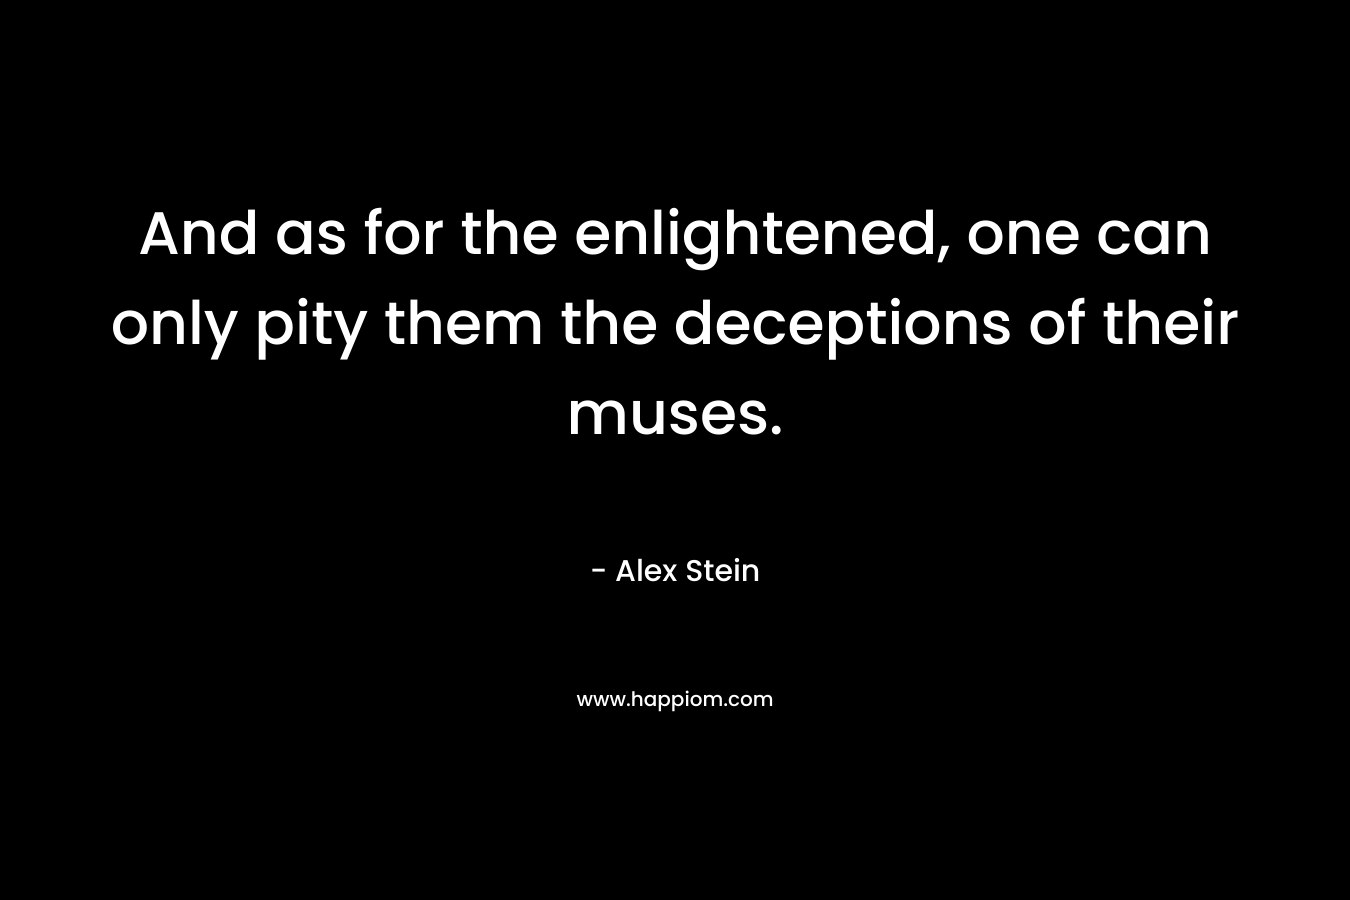 And as for the enlightened, one can only pity them the deceptions of their muses.